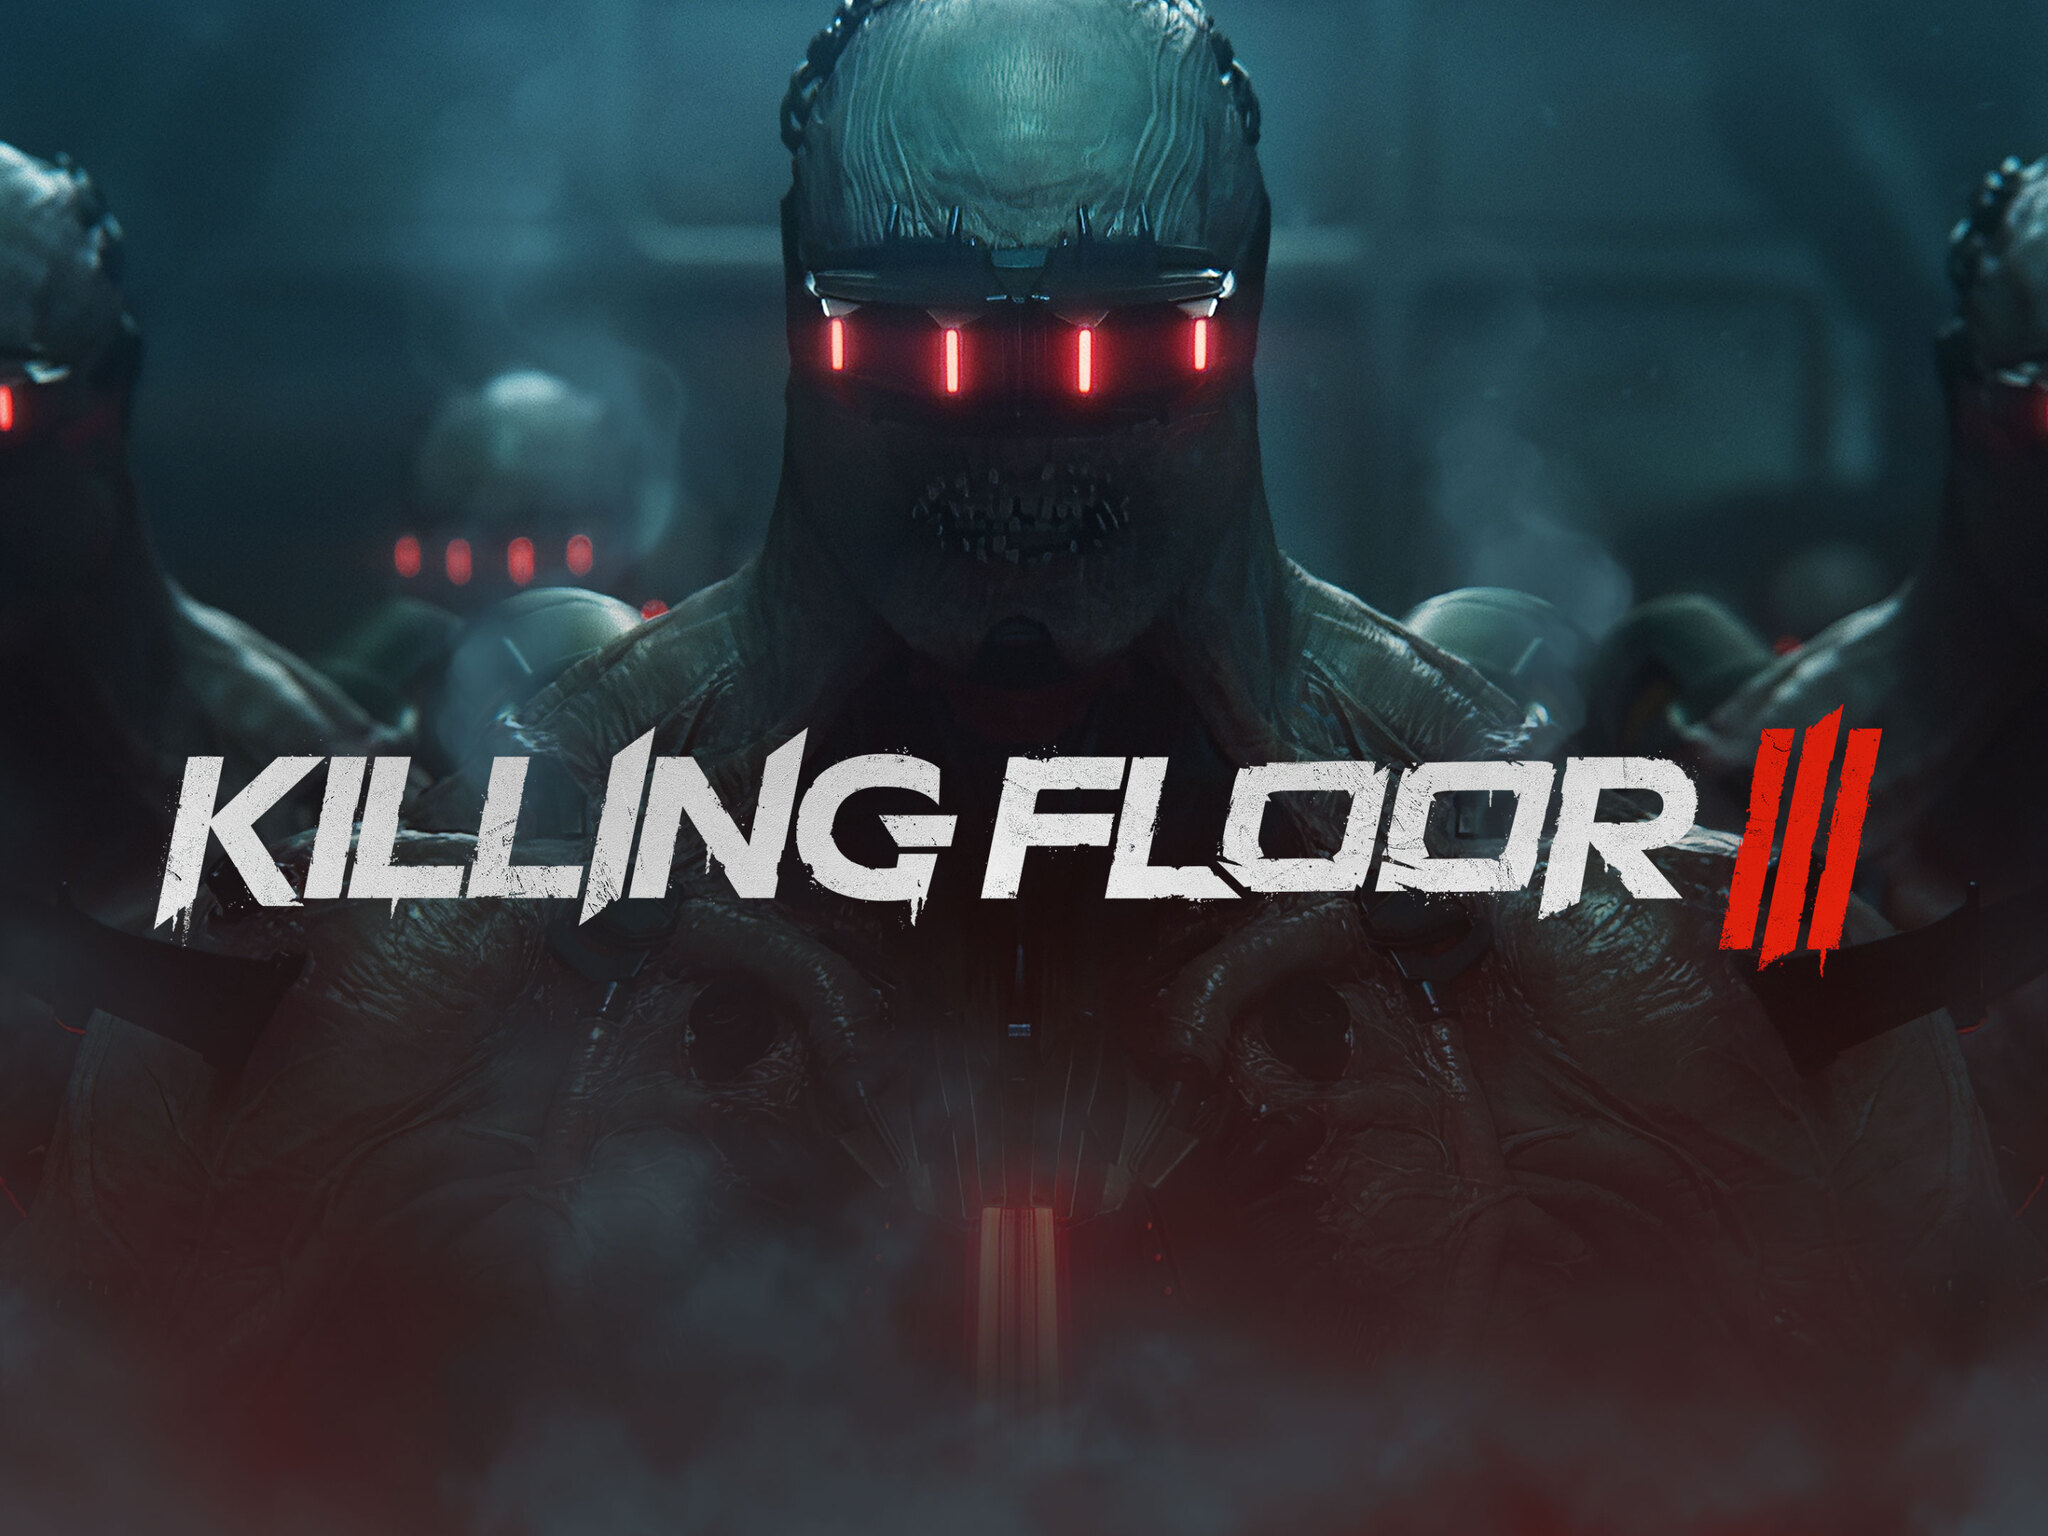 Zeds Are Back, As Killing Floor 3 Announced